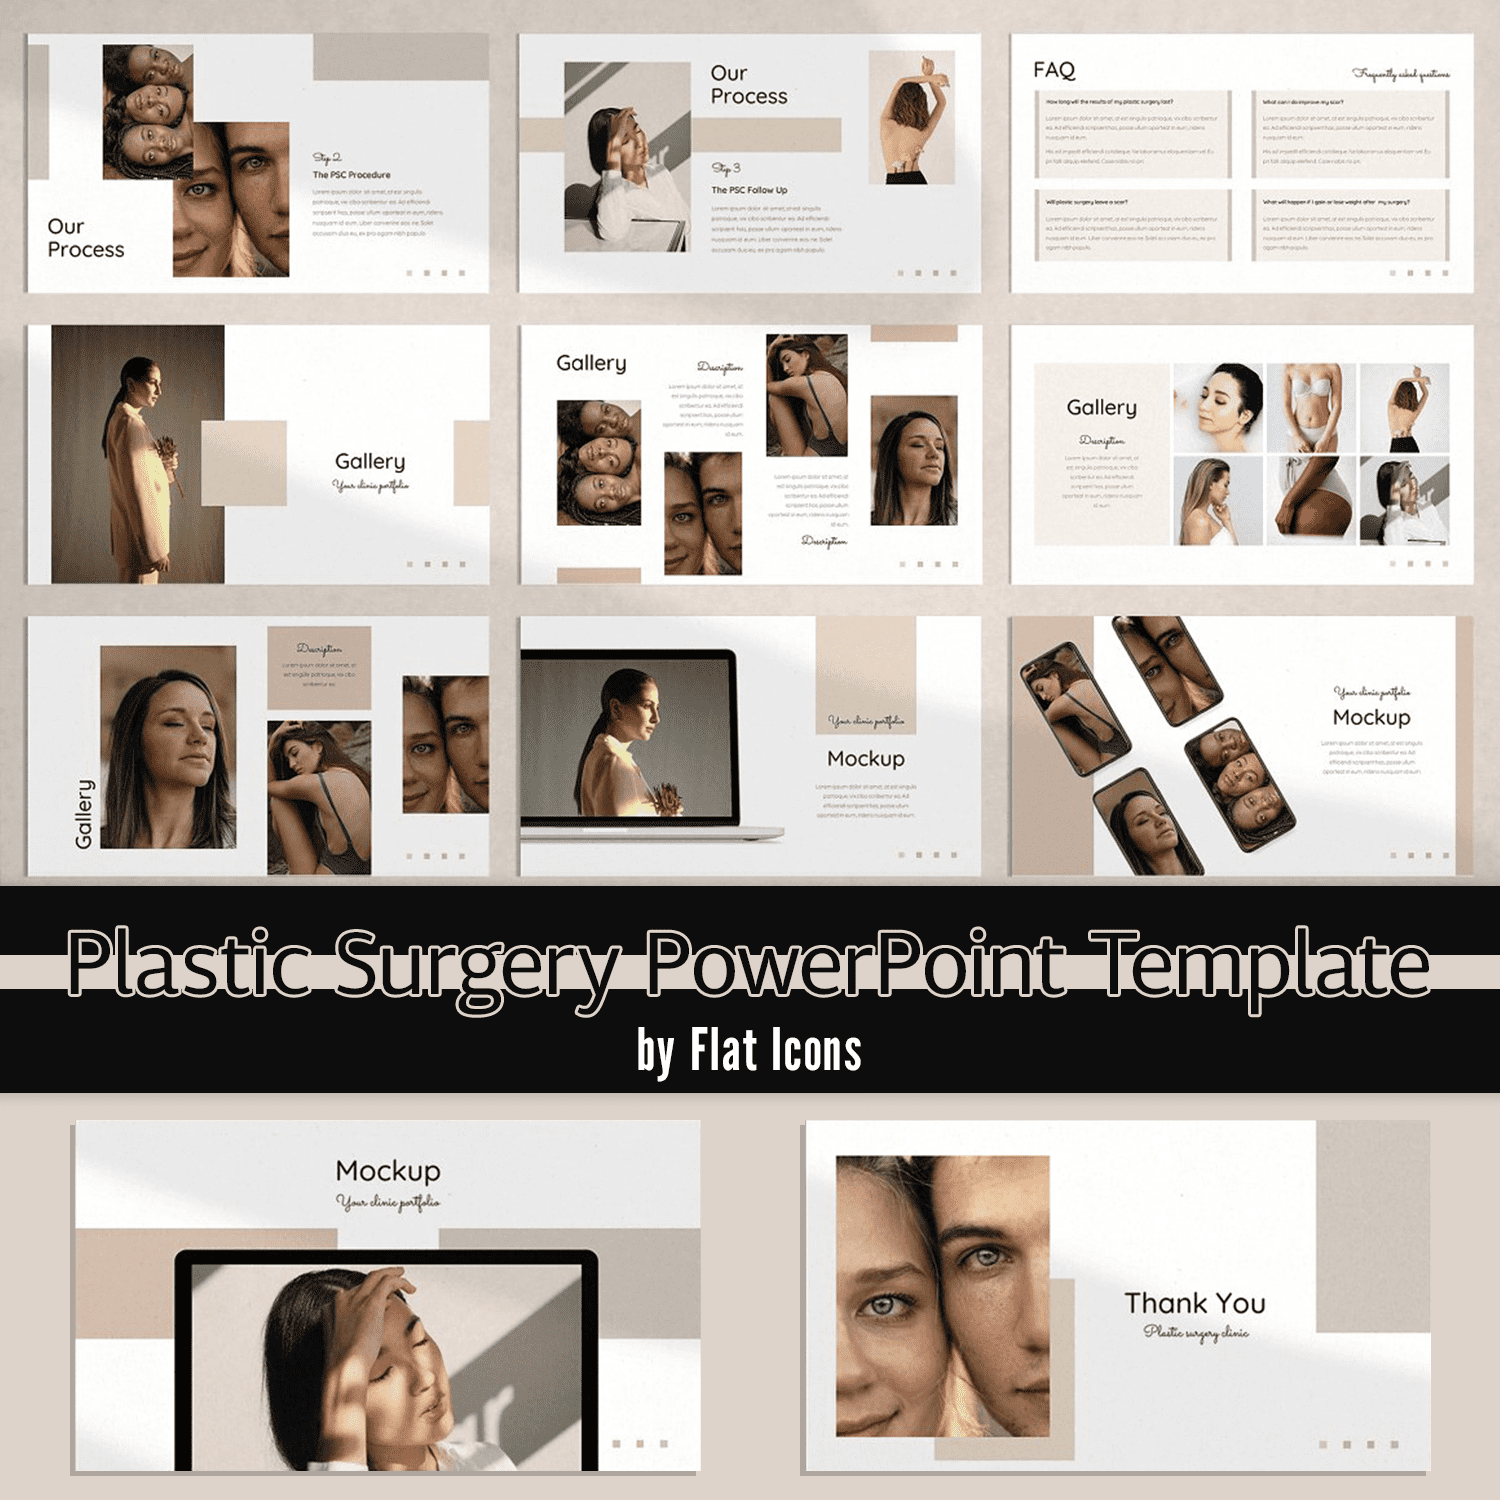 Plastic Surgery PowerPoint Template.